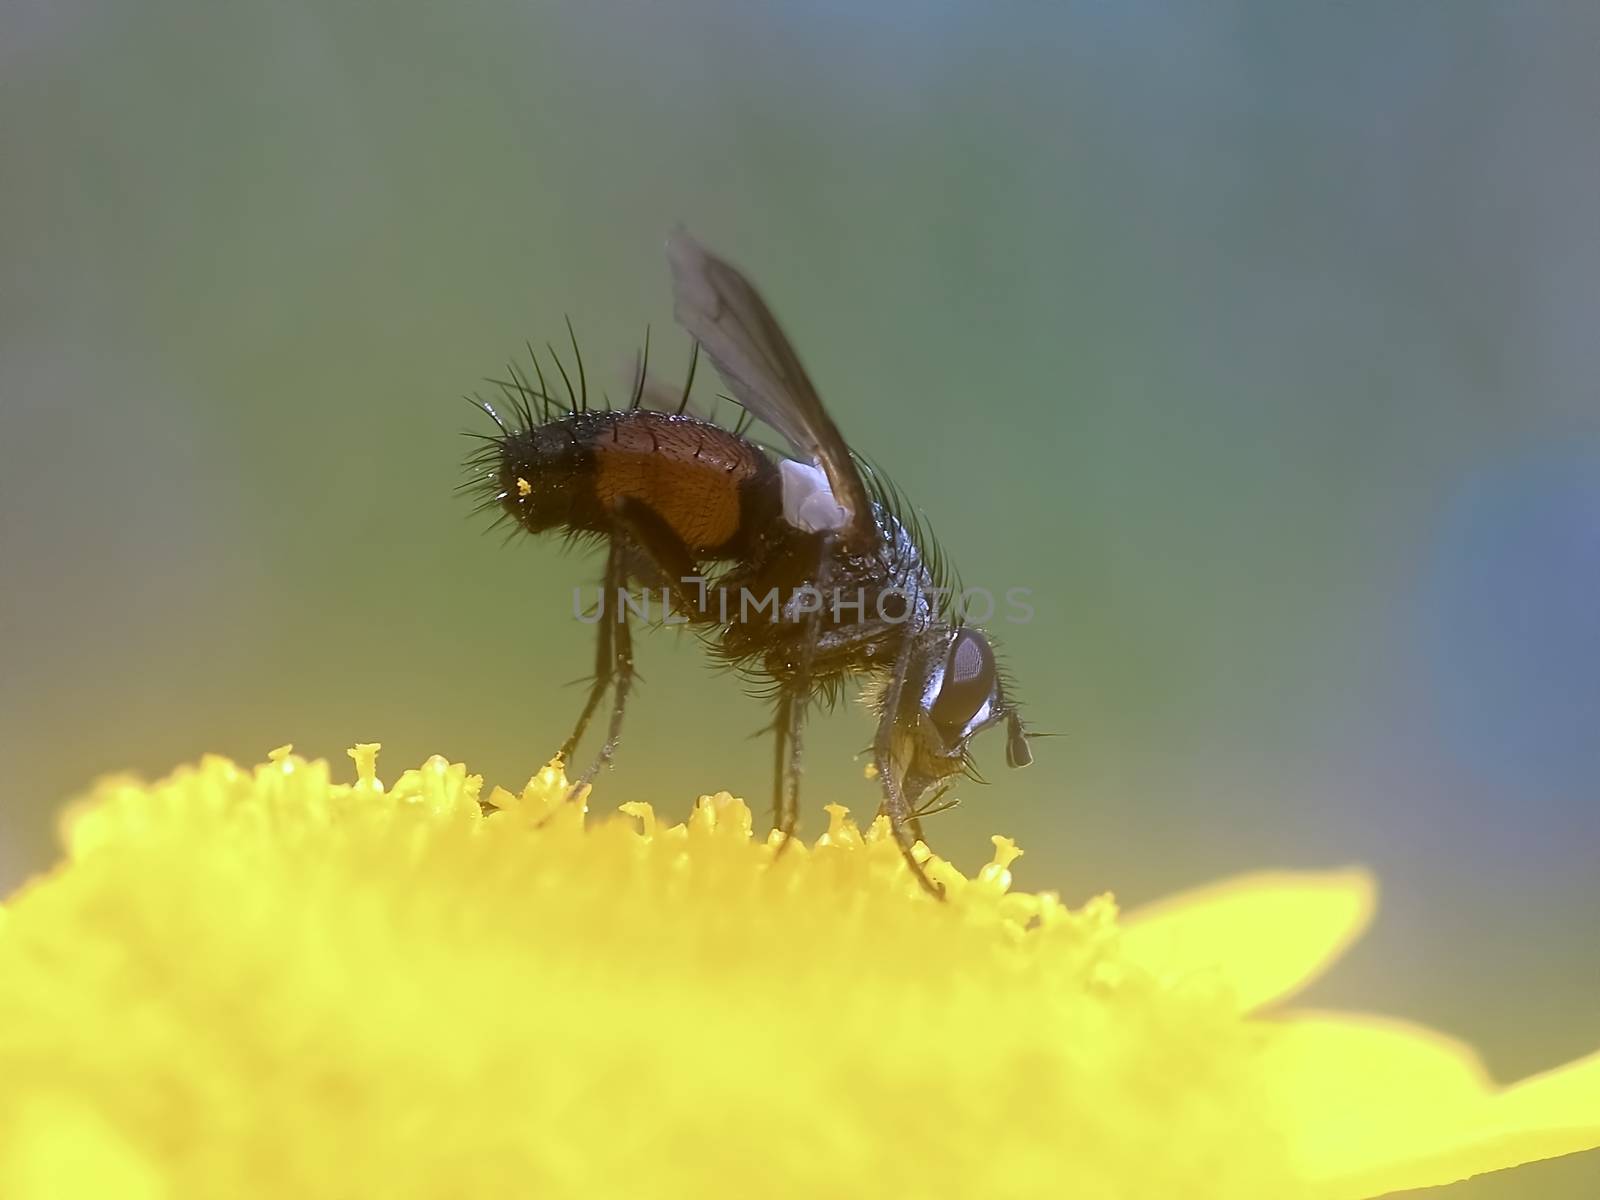 Interesting macro of a fly on a yellow flower by Stimmungsbilder